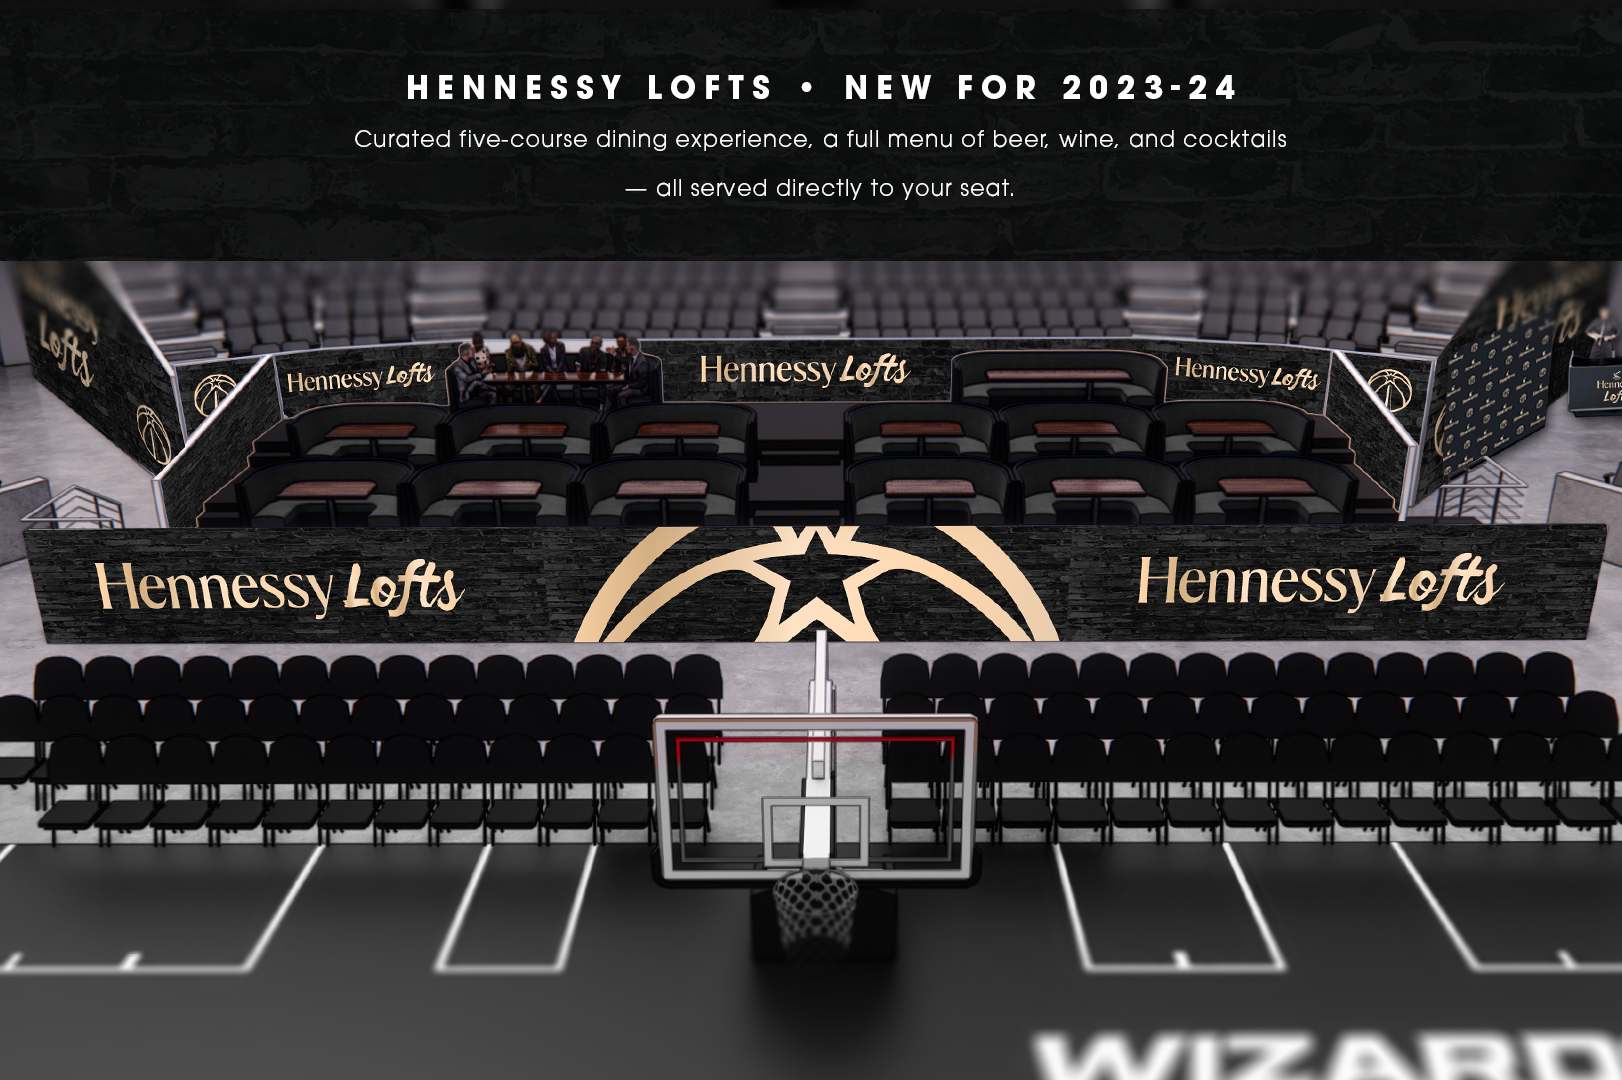 Renting a Hennessy loft for Wizards home games will cost you $128,000 a year